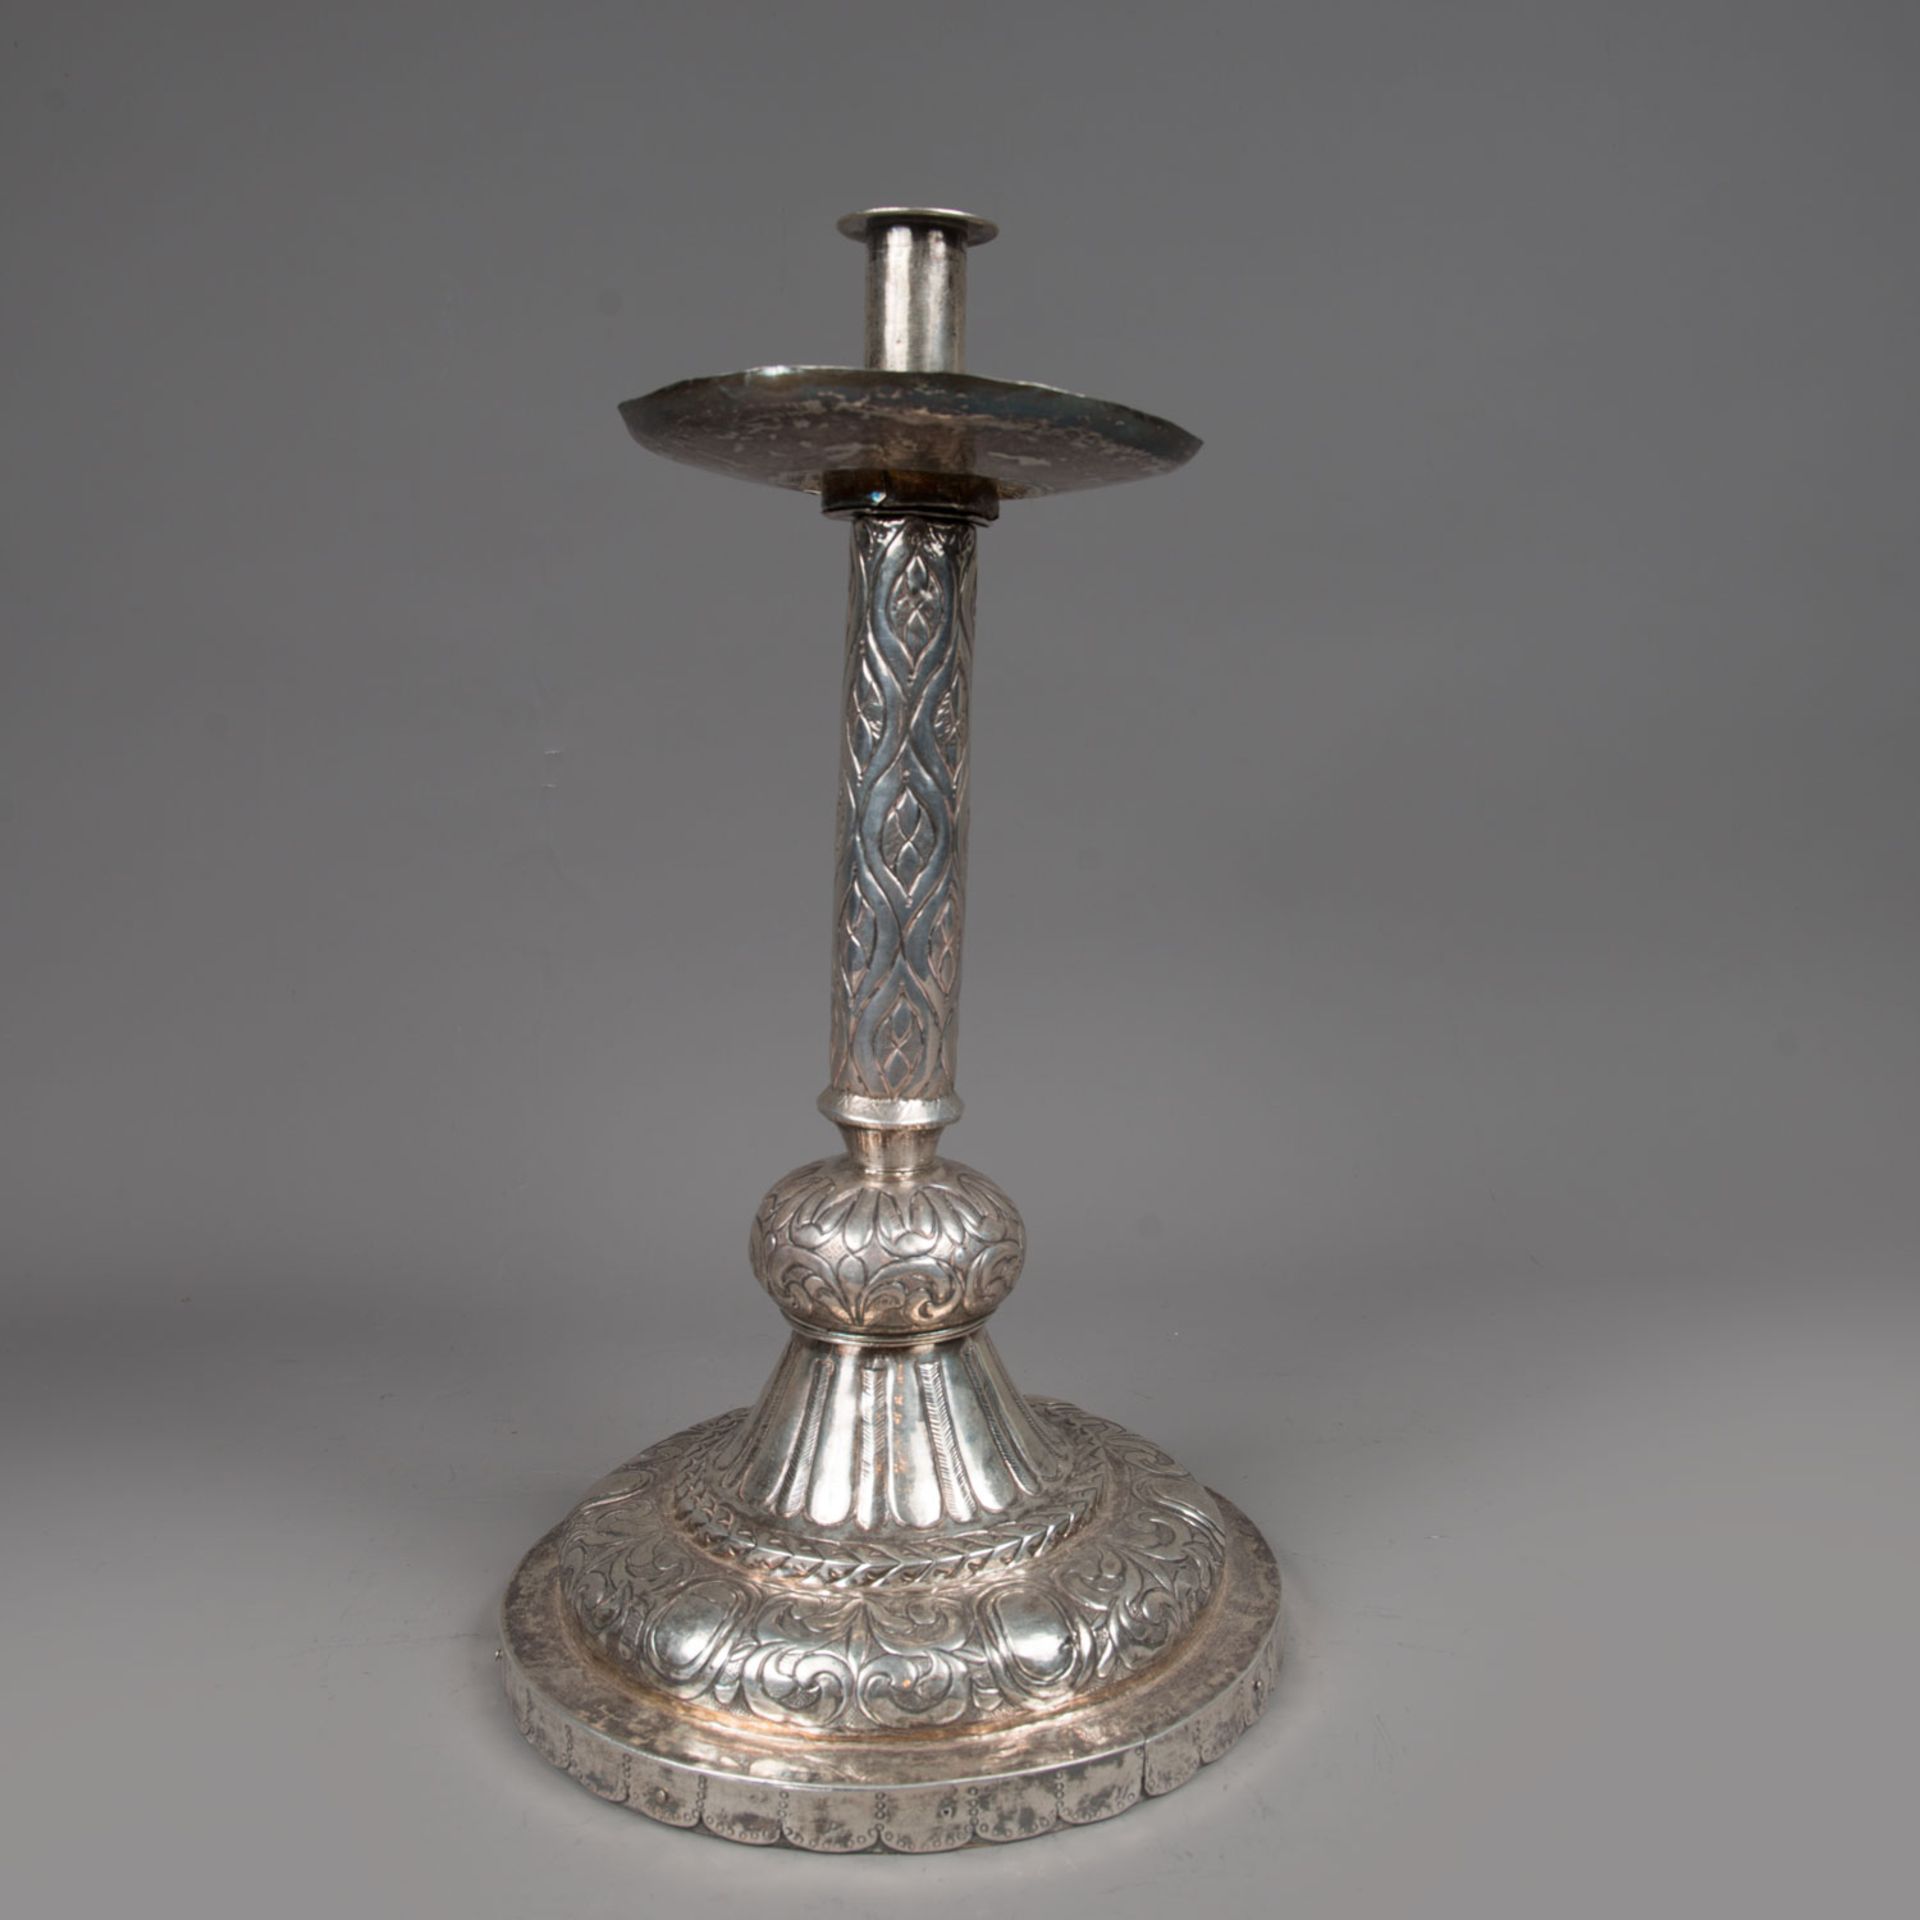 Two South American Candlesticks - Image 3 of 3